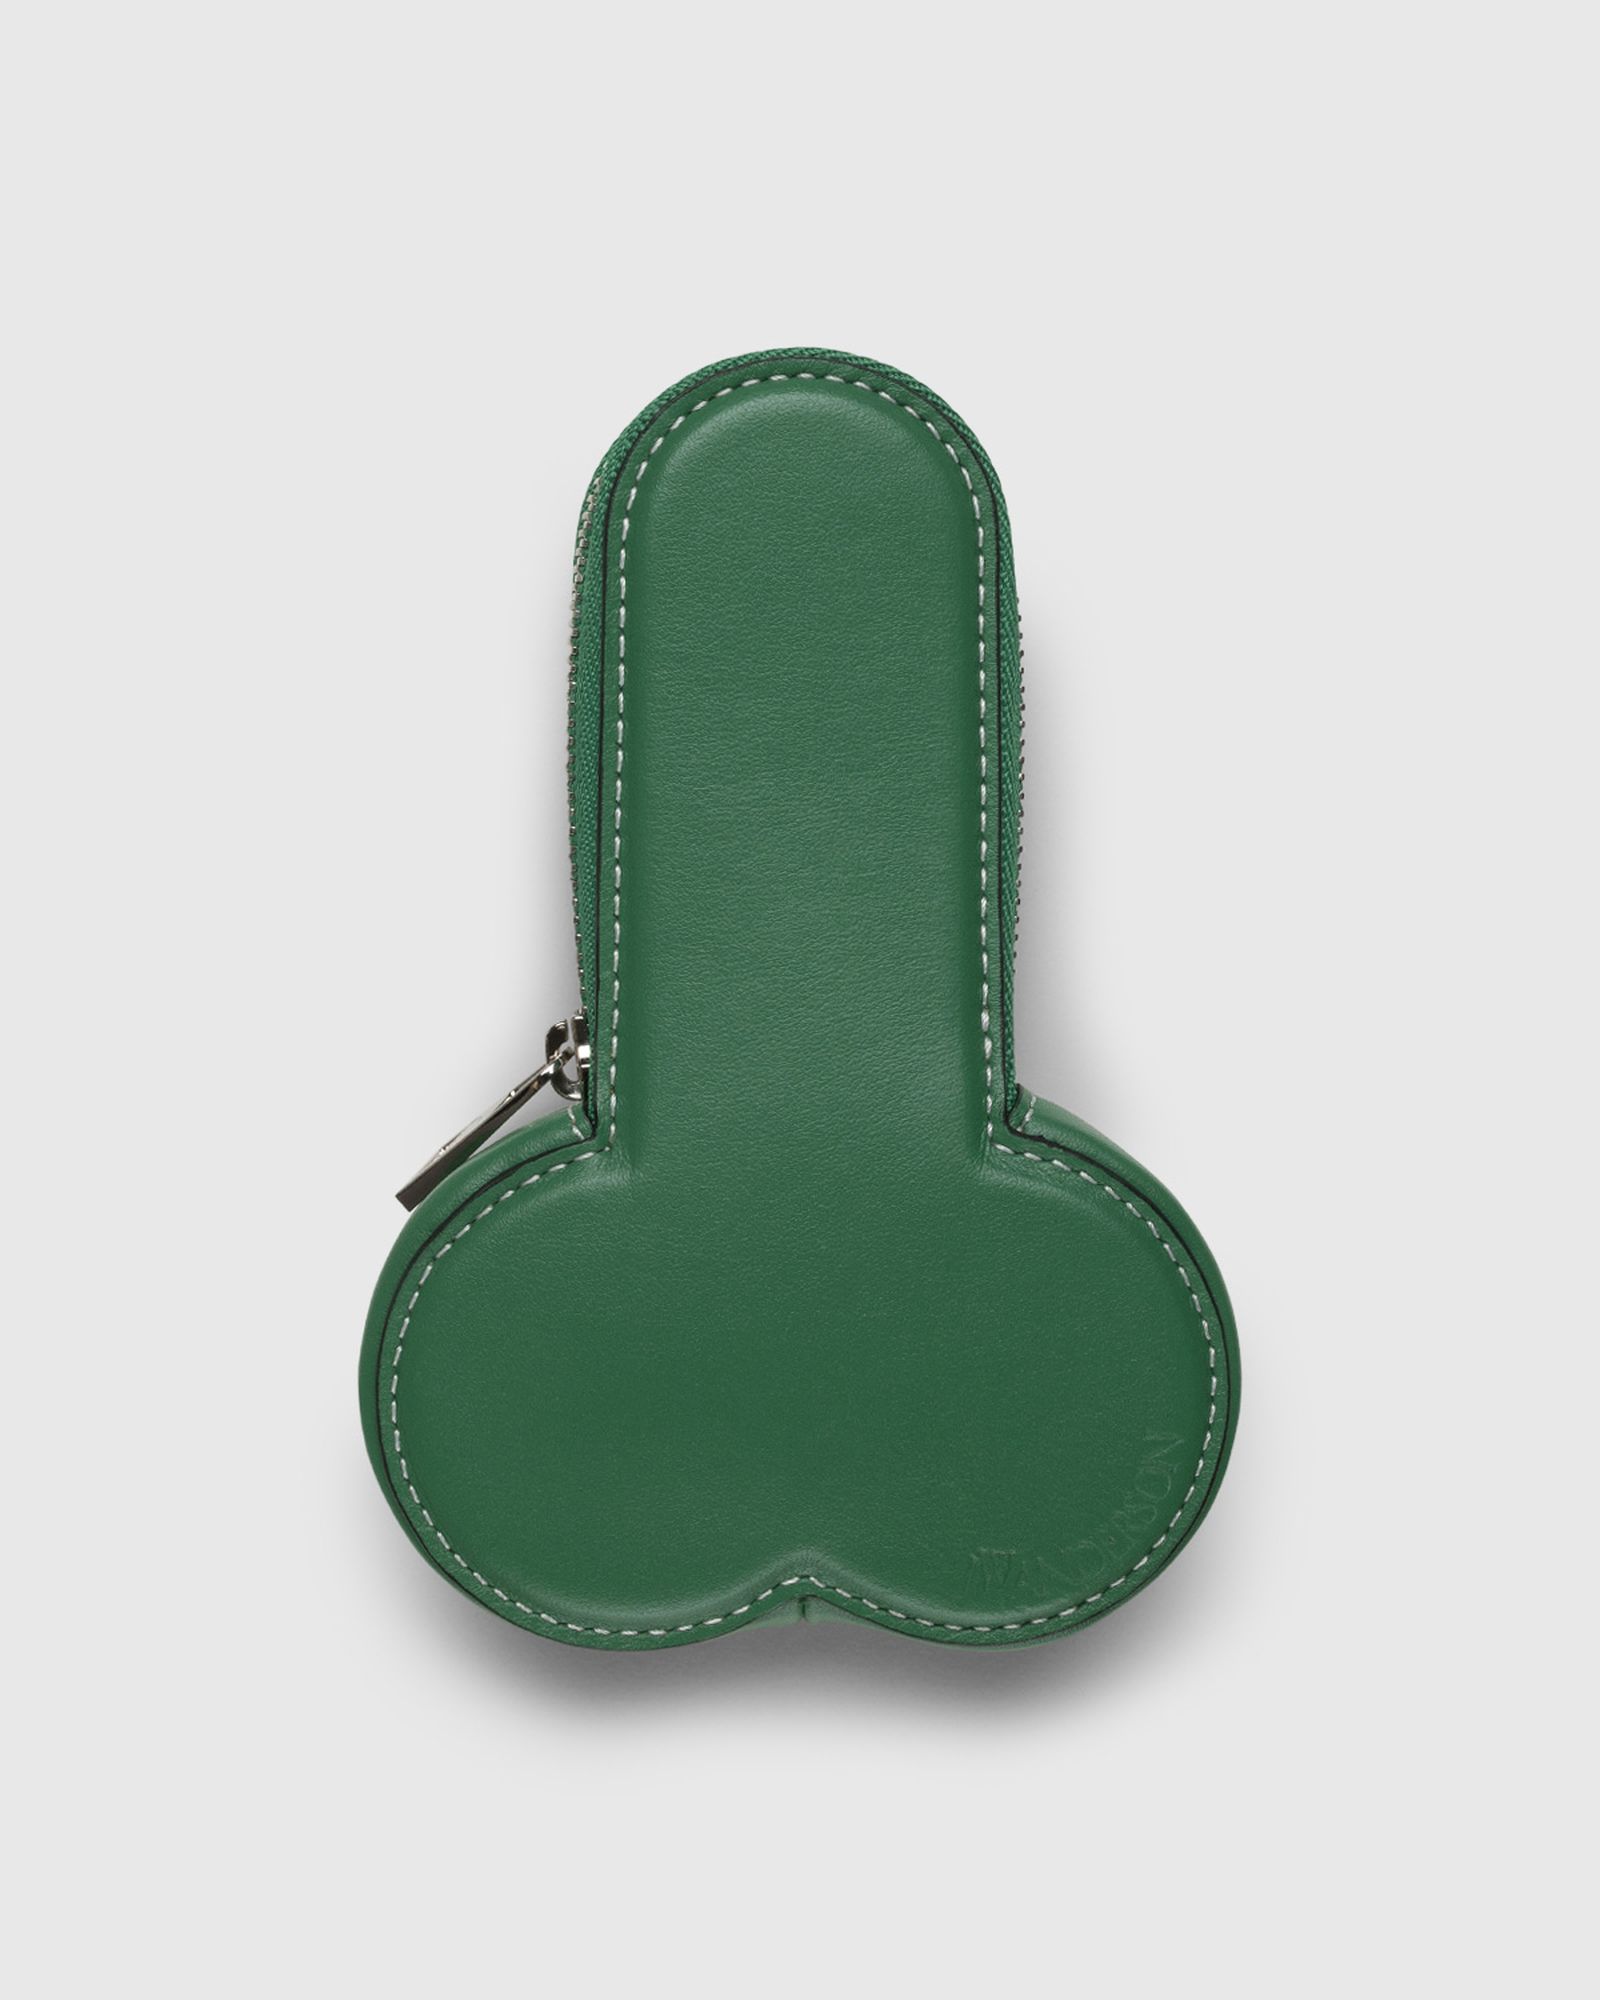 jw-anderson-penis-coin-purse-02